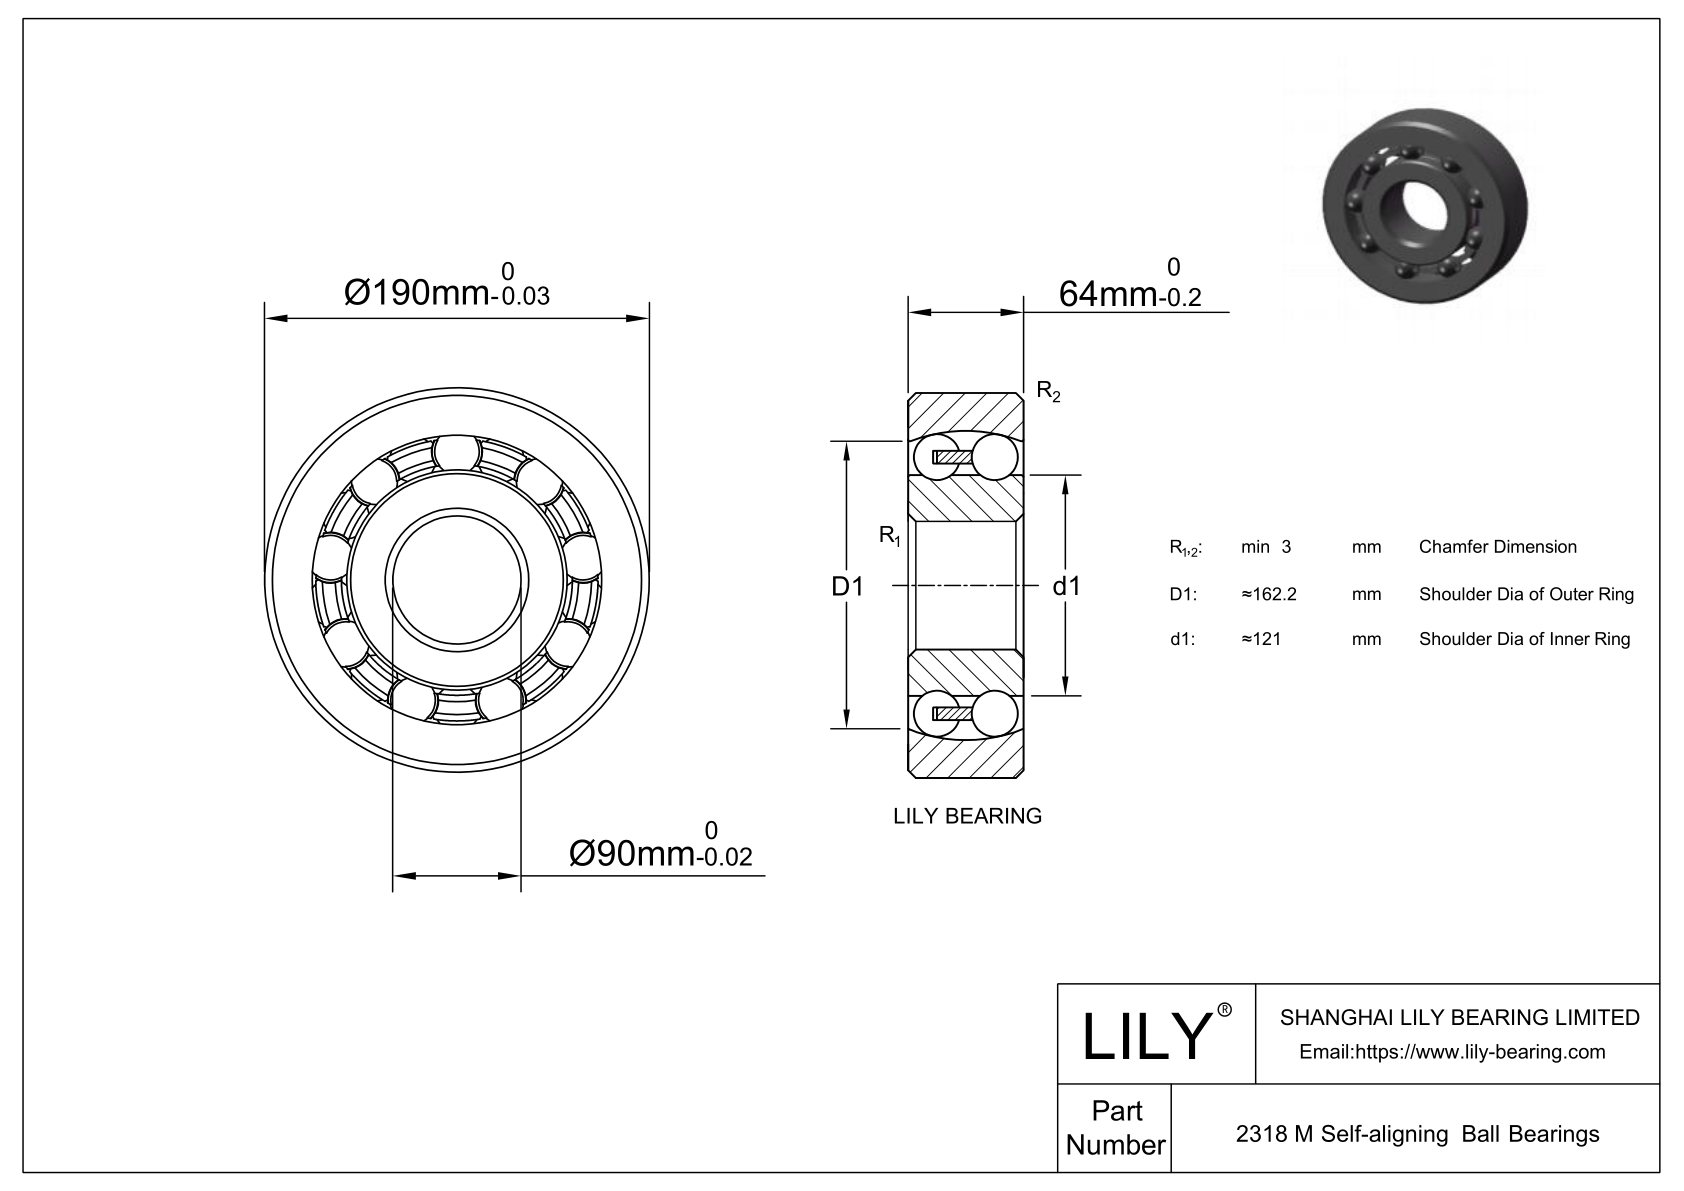 S2318 M Stainless Steel Self Aligning Ball Bearings cad drawing